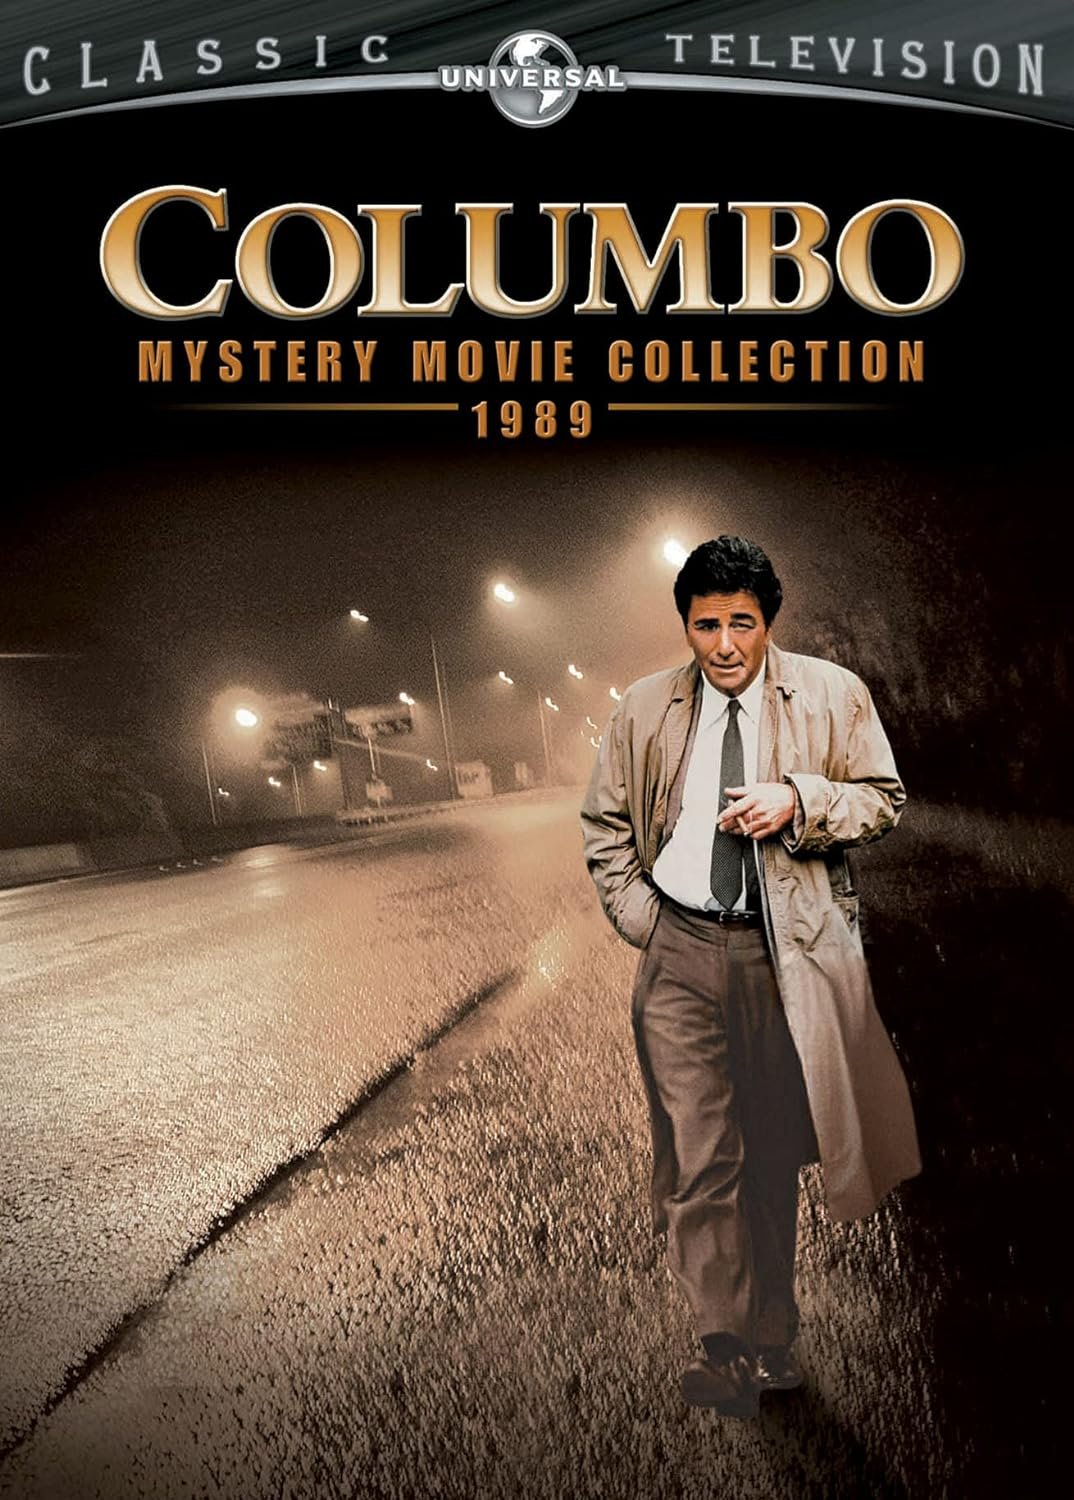 Columbo: Mystery Movie Collection, 1989